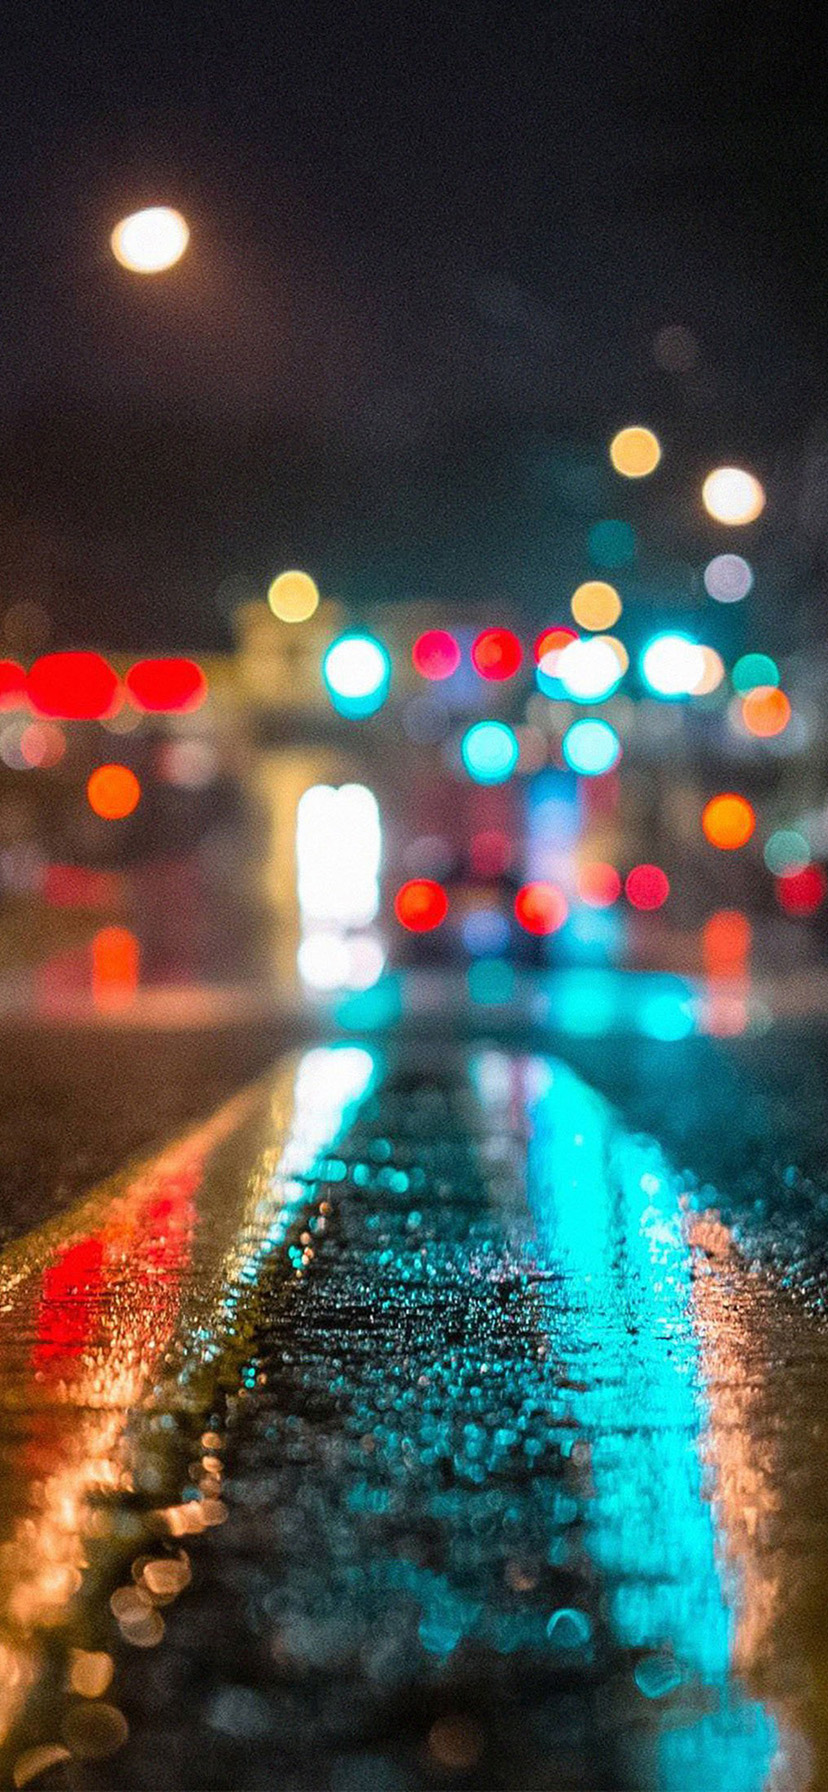 Iphone Xr Wallpapers Download Rainy City Nature - City Lights Background  Portrait - 828x1792 Wallpaper 